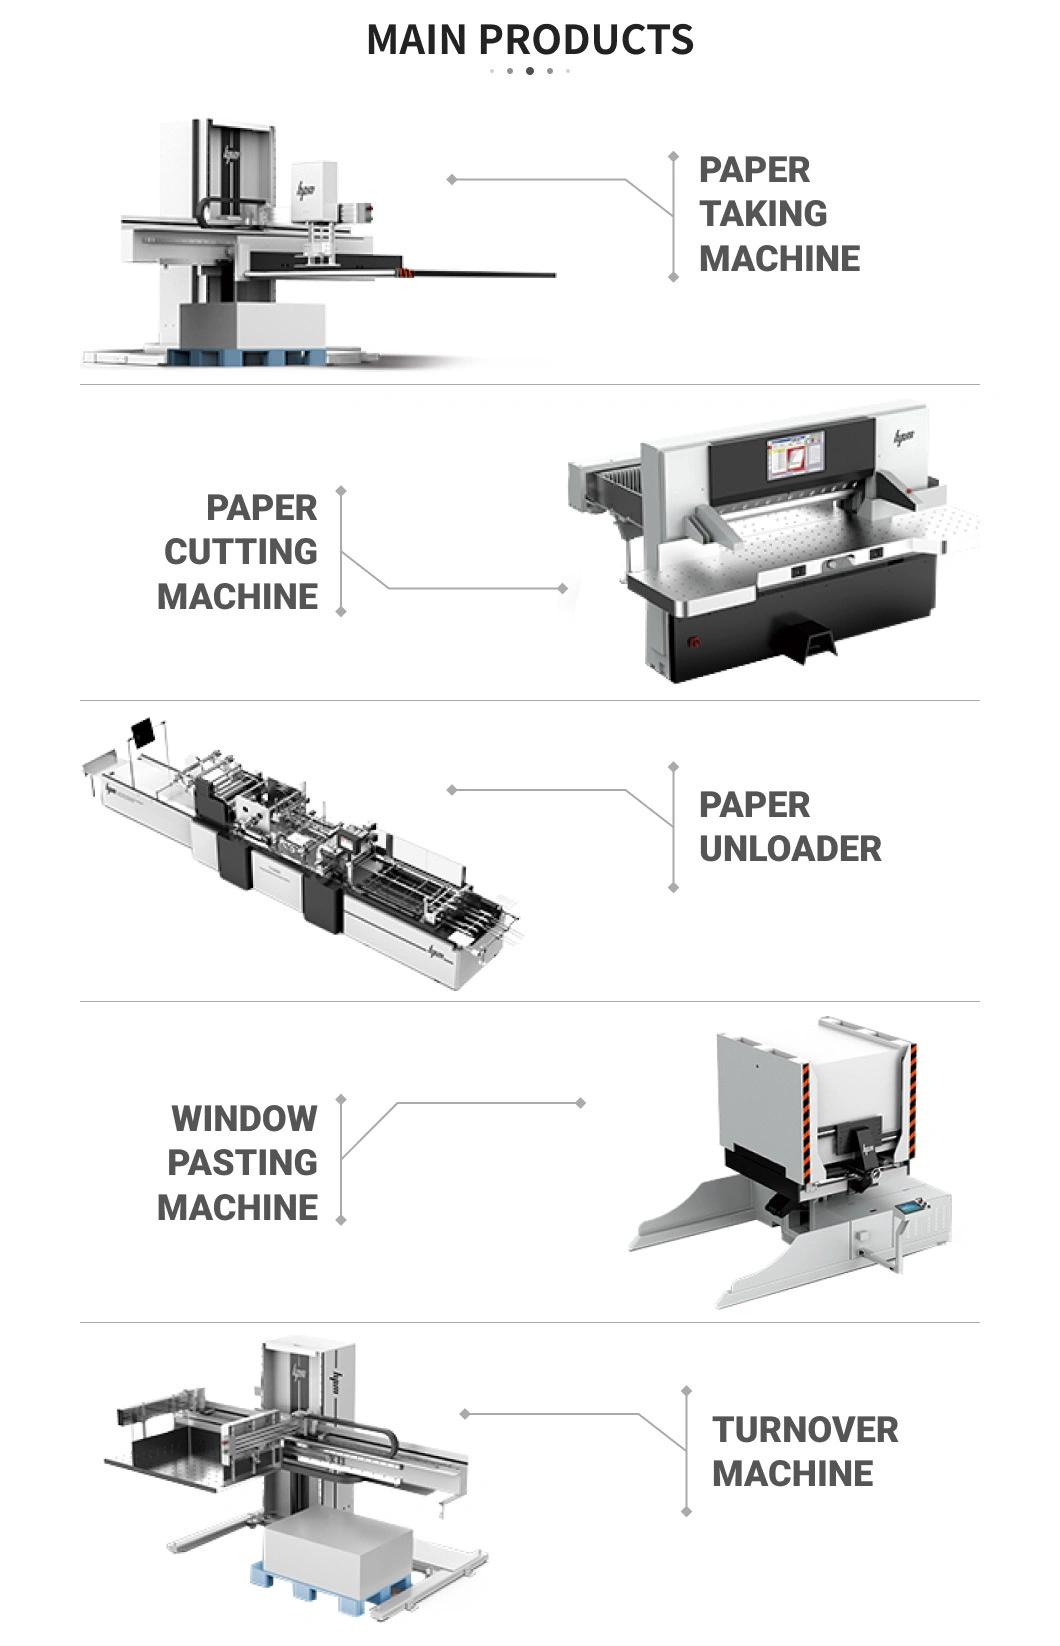 Automatic High Quality High Speed Intelligent Guillotine Control Hydraulic Heavy Duty Paper Cutter